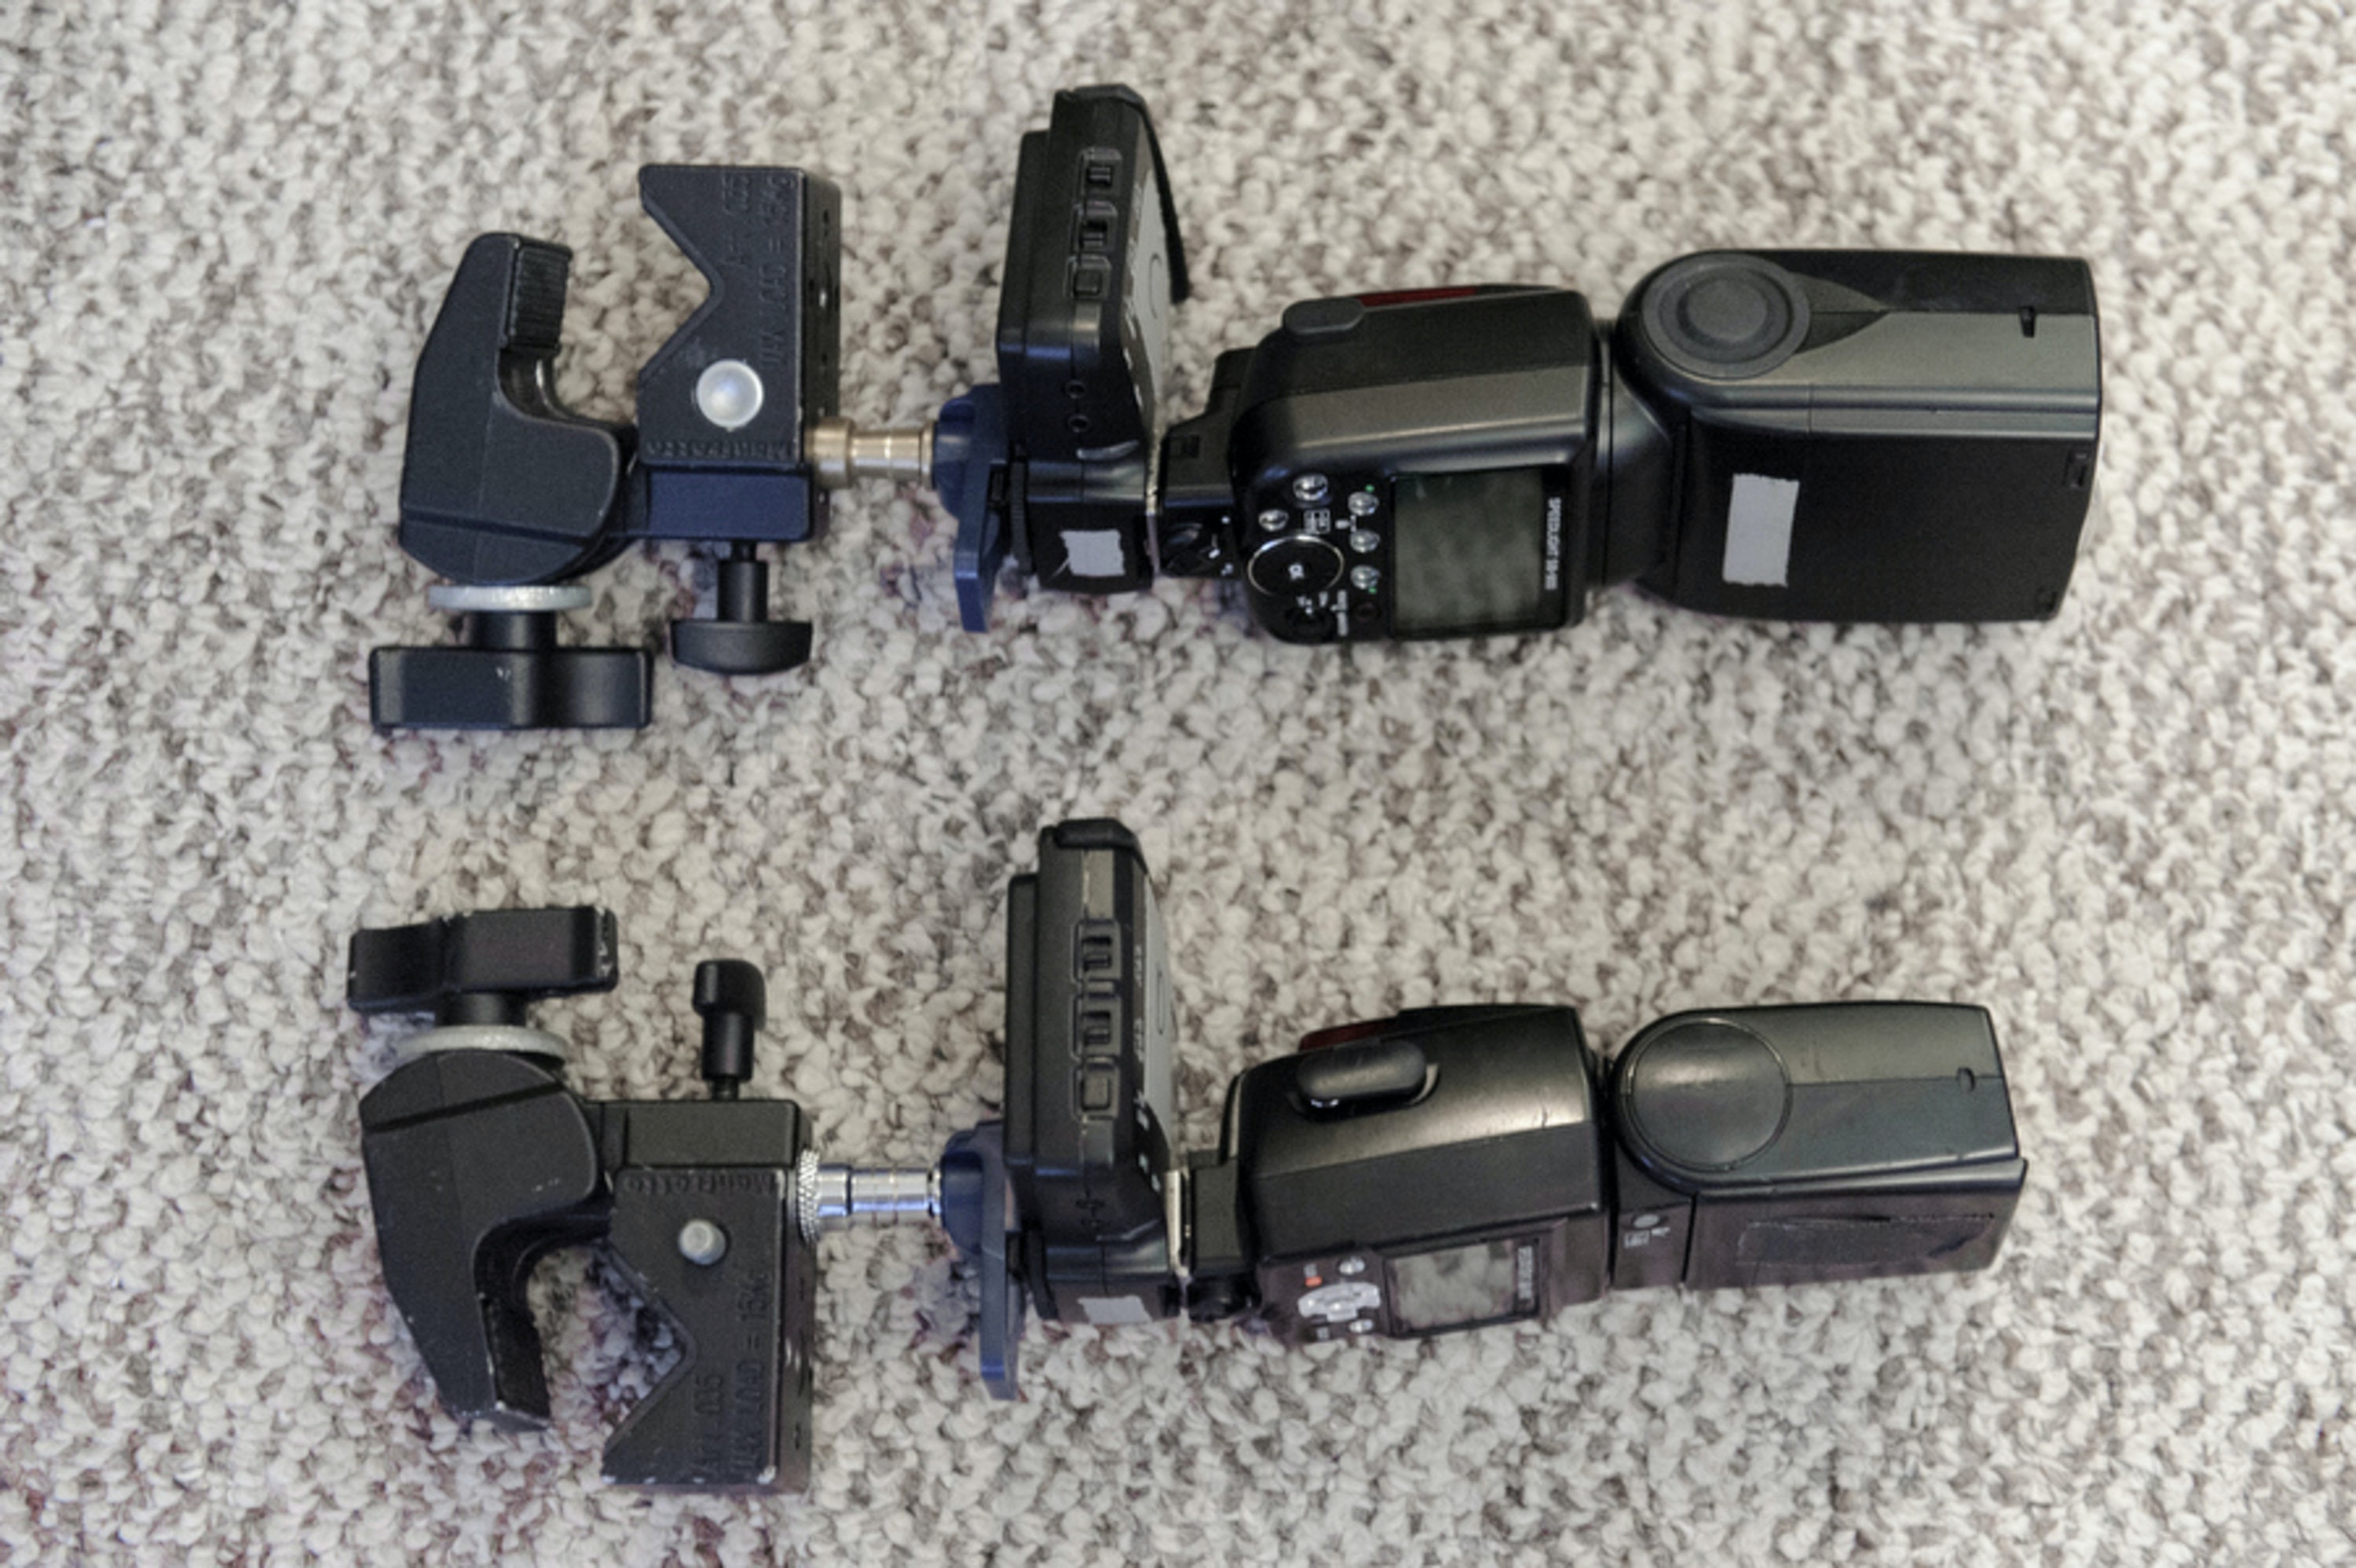 Speedlight flashes mounted to radios on super clamps